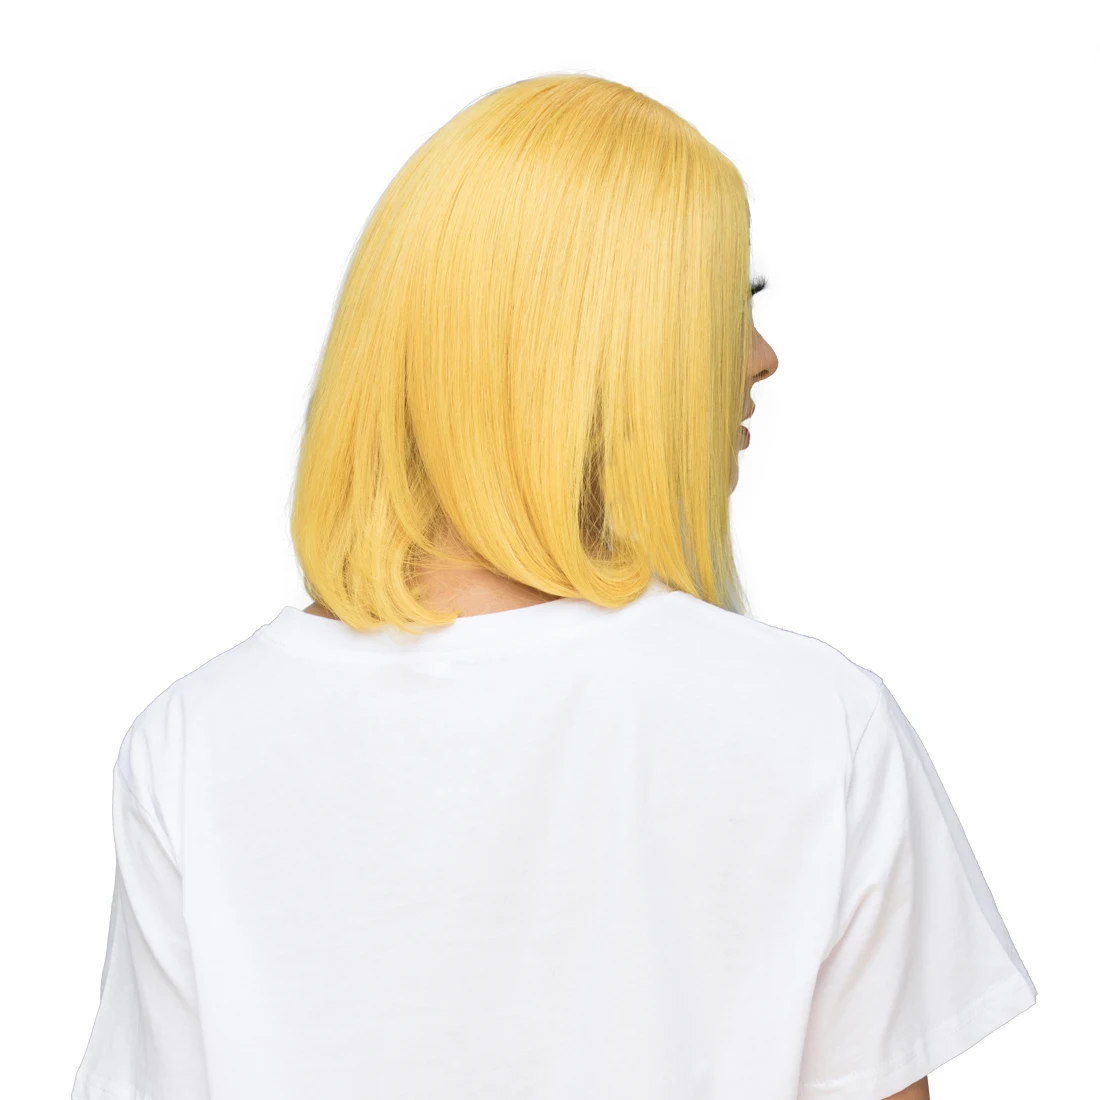 Lsy Hair Ginger Royal Yellow Color Human Hair Bob Wigs, Glueless Straight Short Lace Front Virgin Human Hair Wigs For Sale.jpg